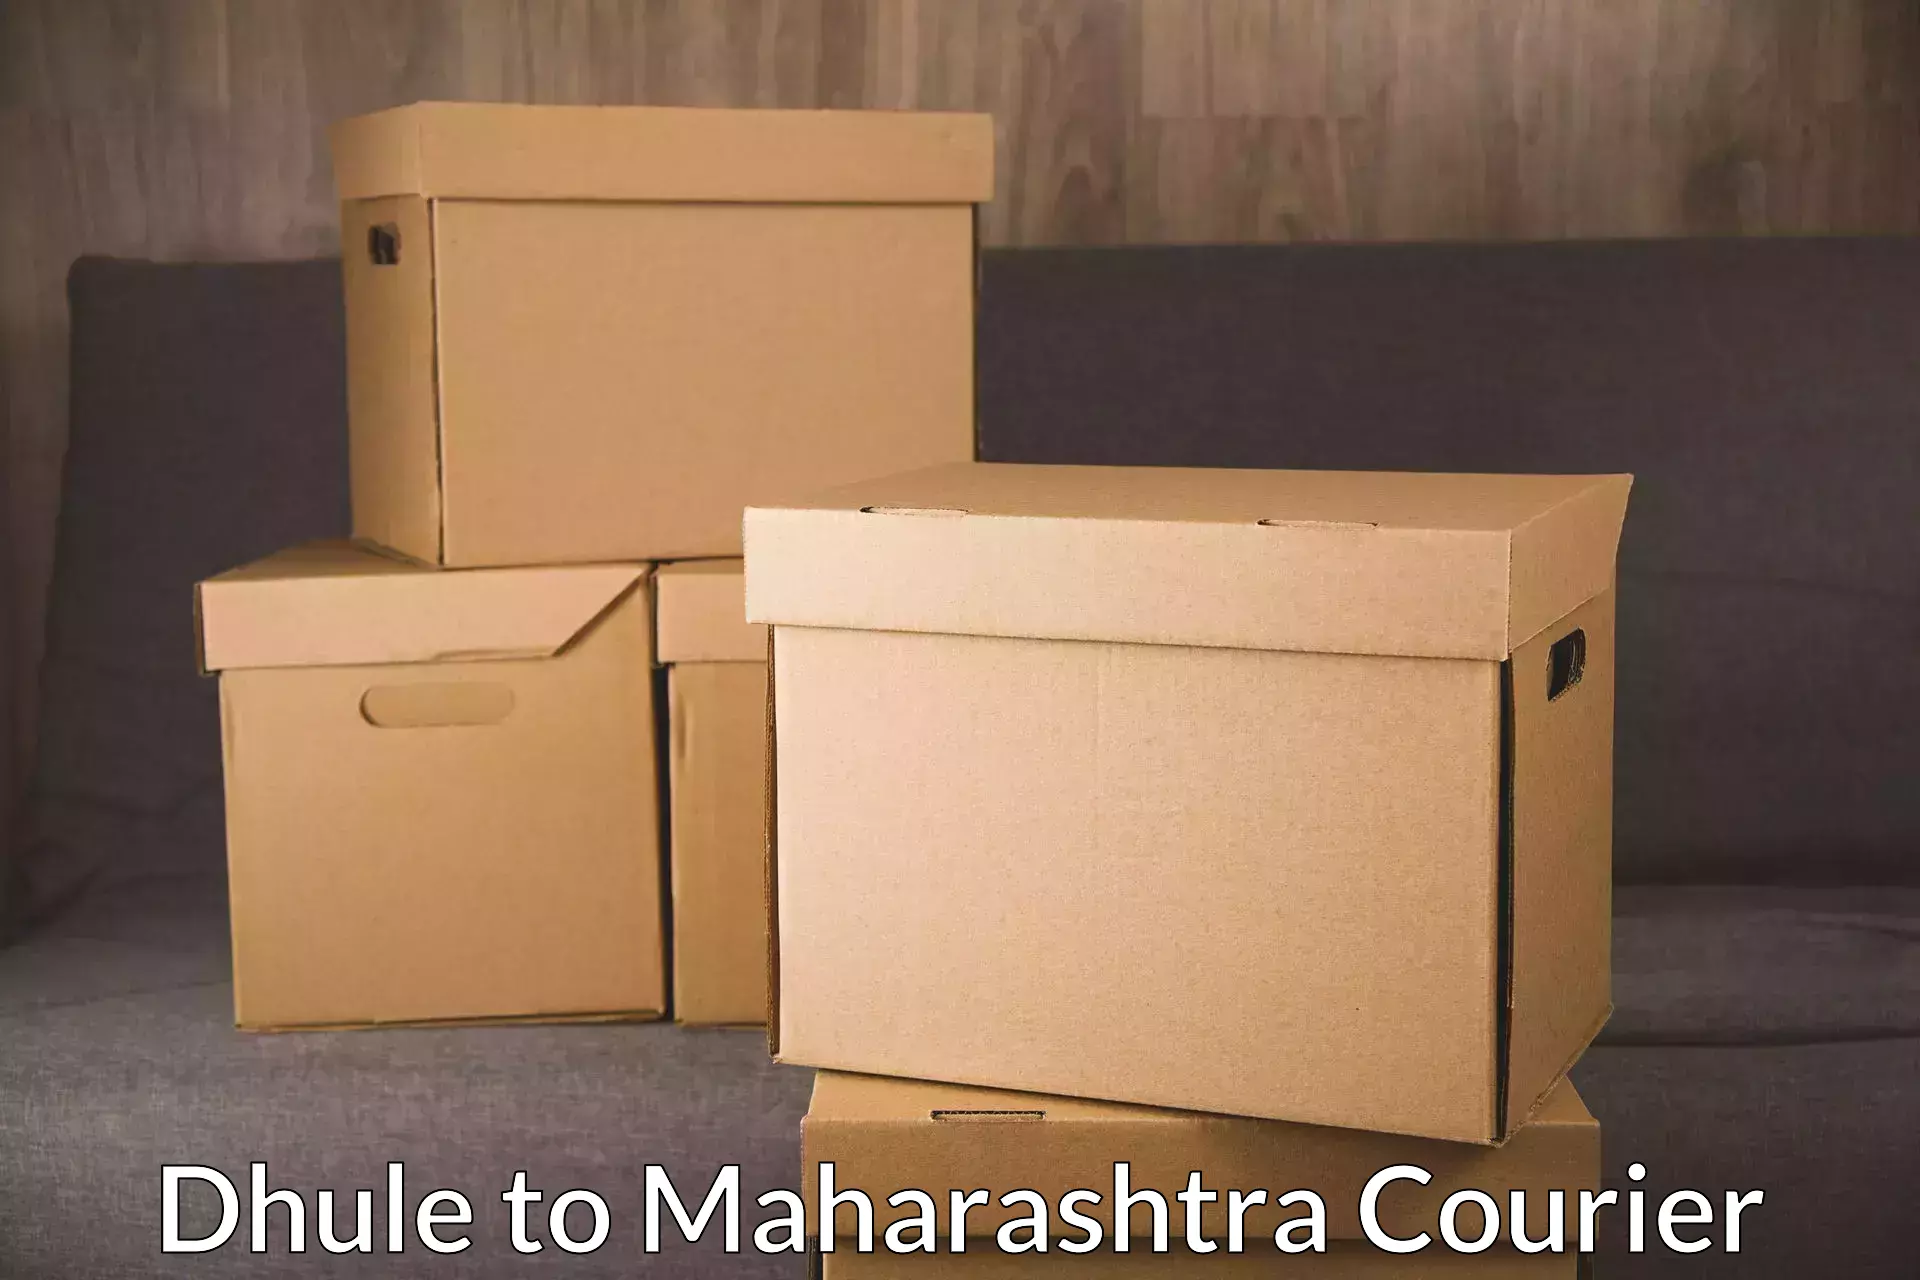 Lightweight parcel options Dhule to Chandrapur